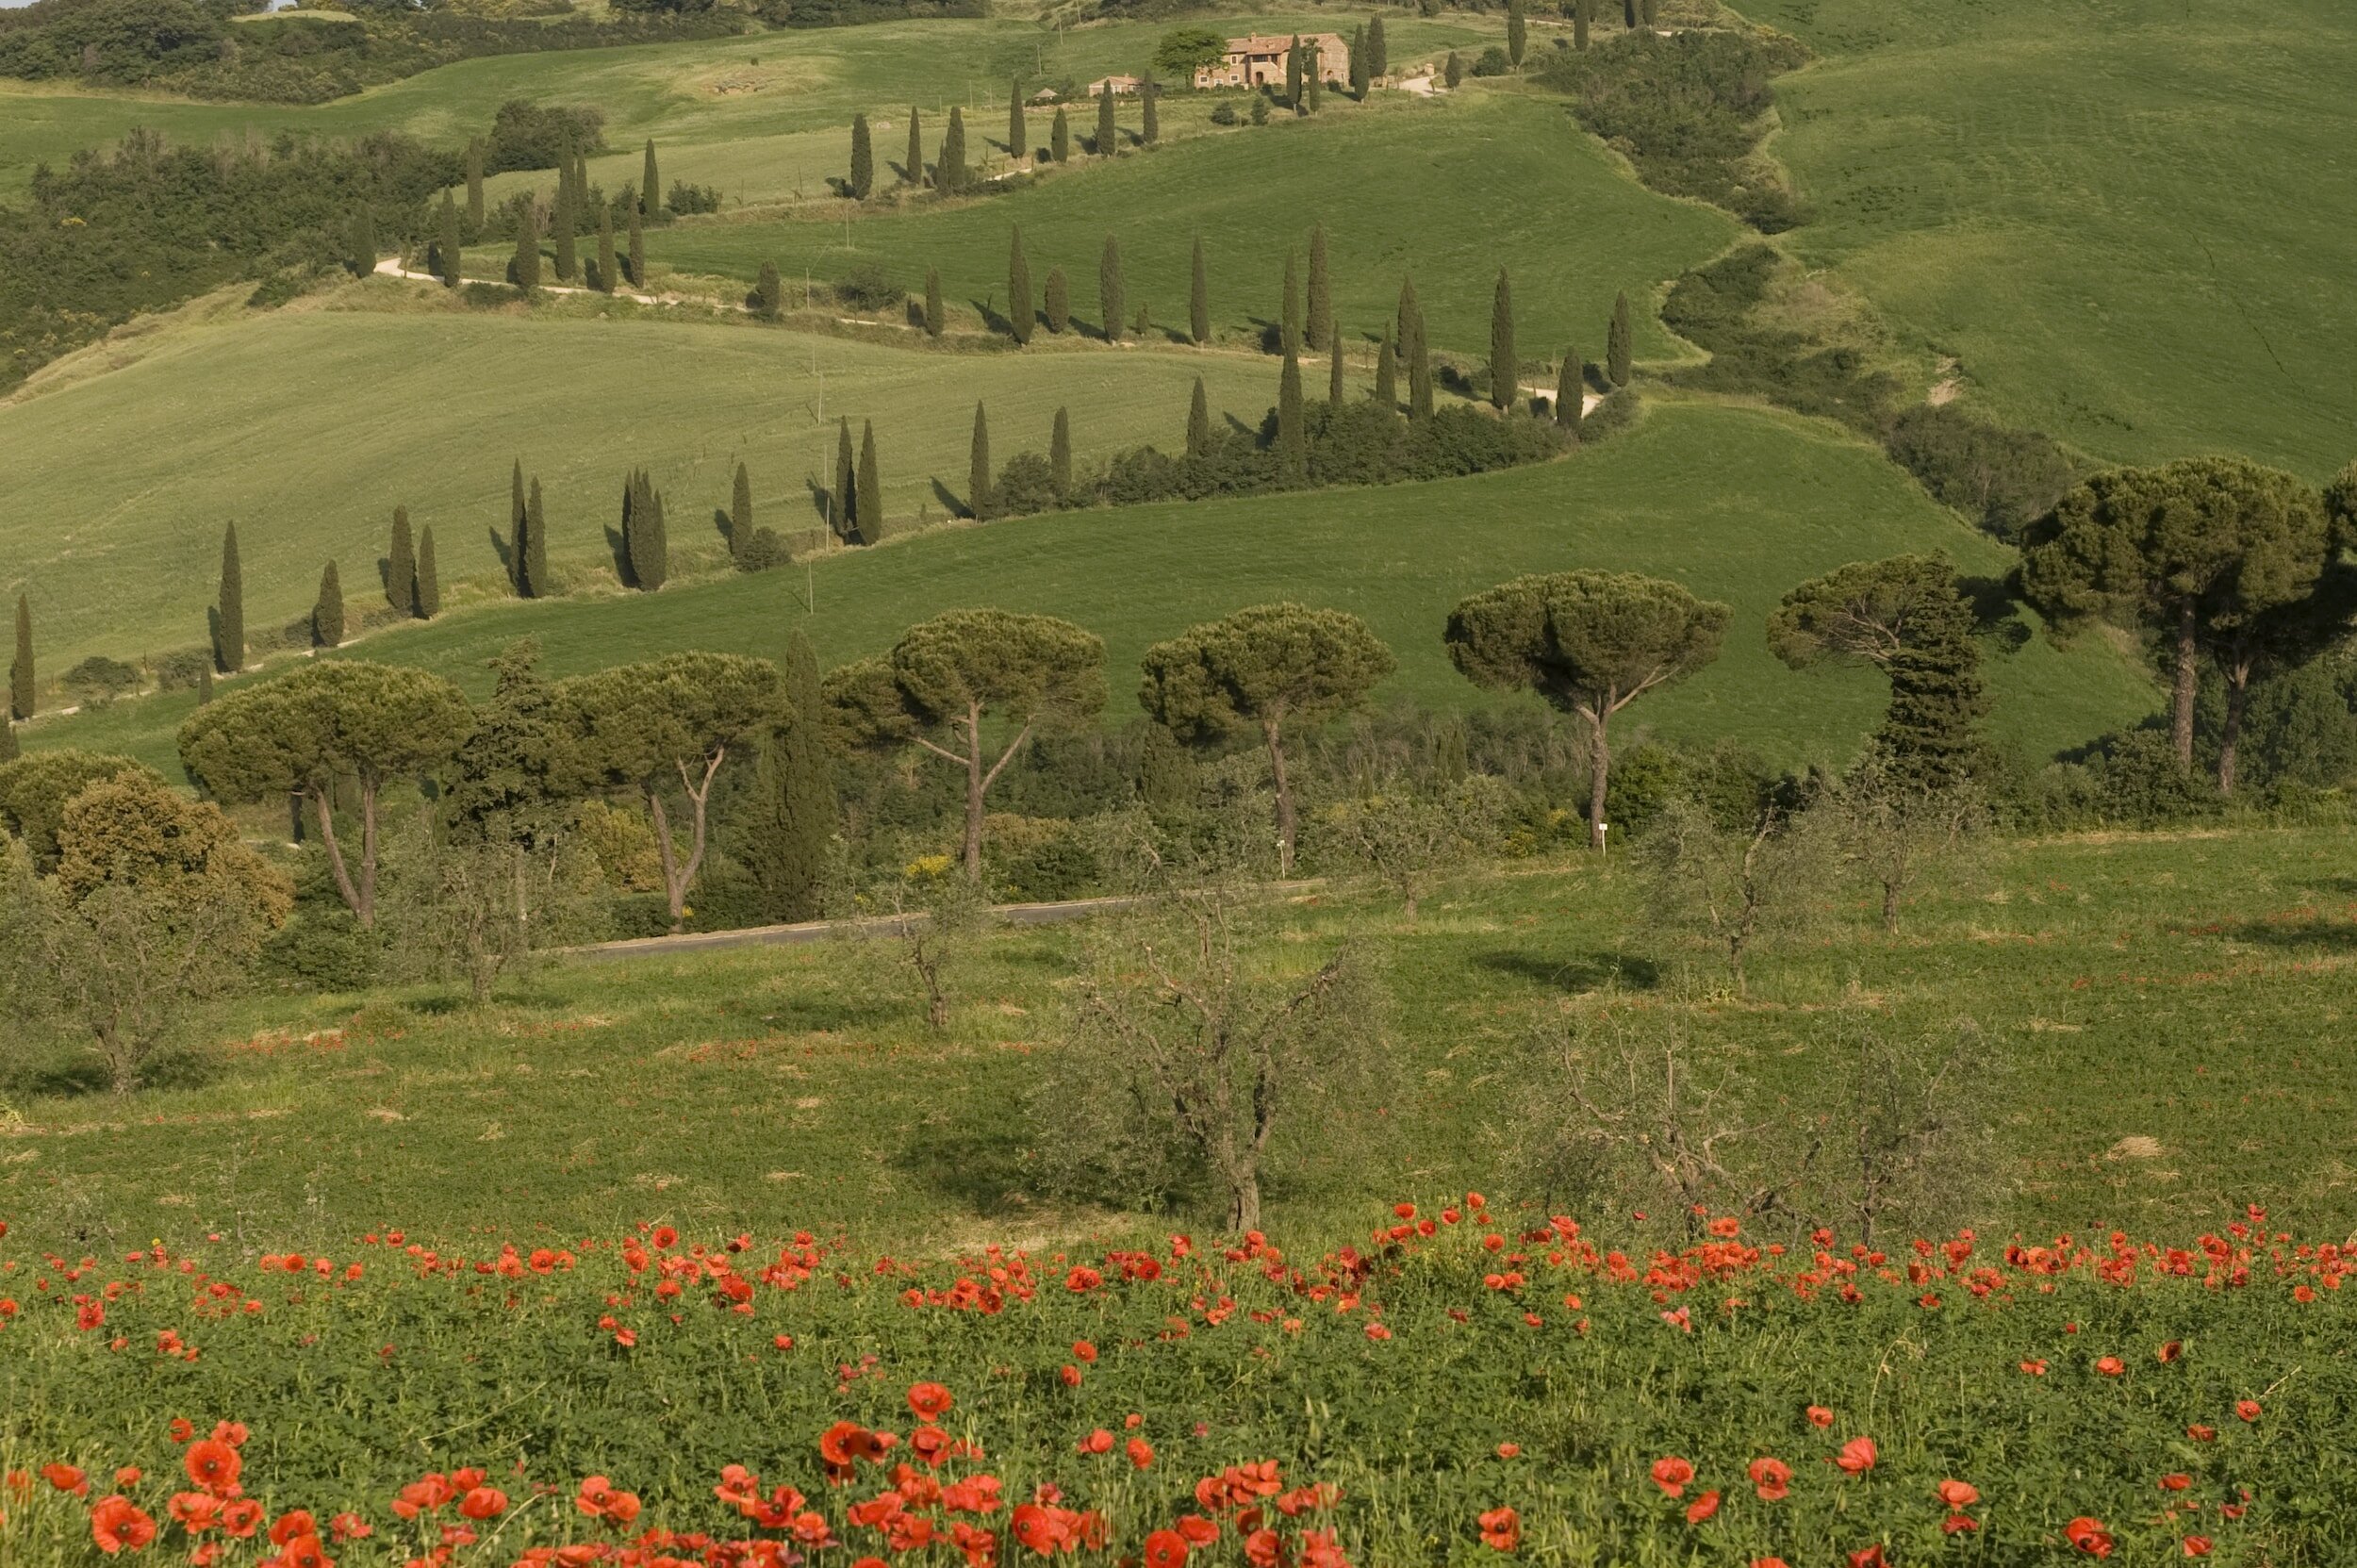 Lush and verdant hills in Tuscany, seen during the springtime, with red flowers in bloom